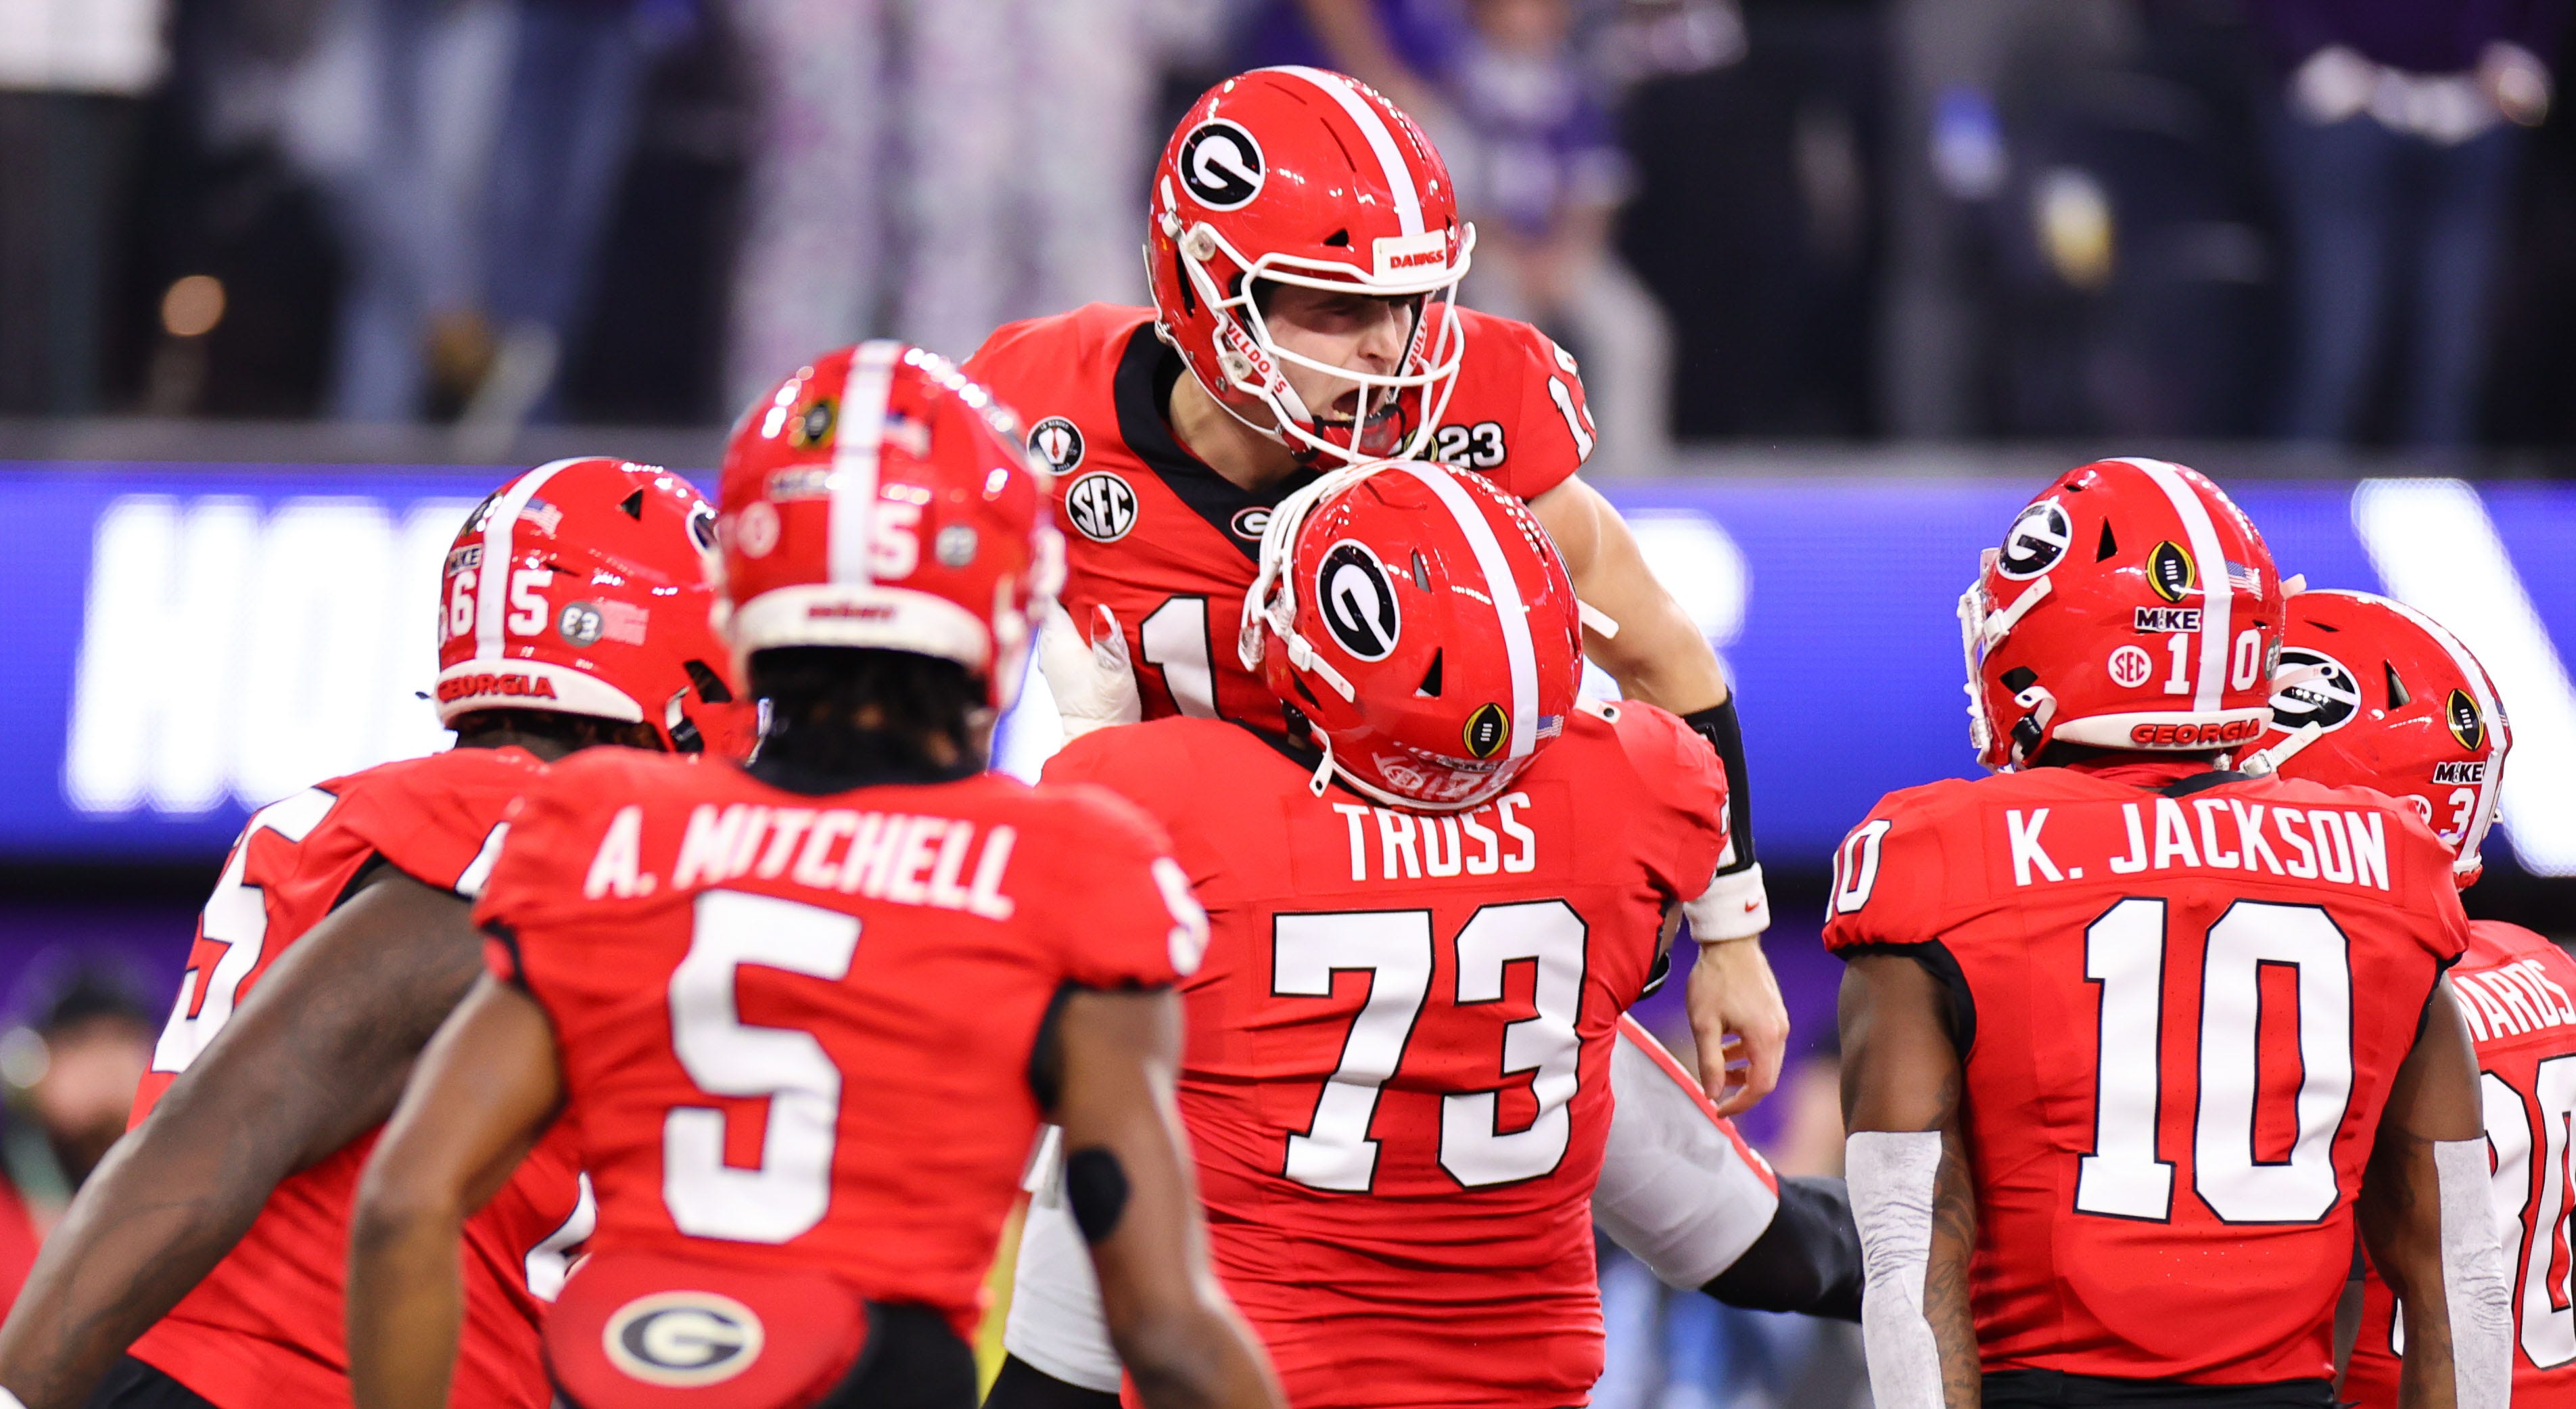 Most points scored in a College Football Championship game: Georgia creates  history in blowout vs. TCU